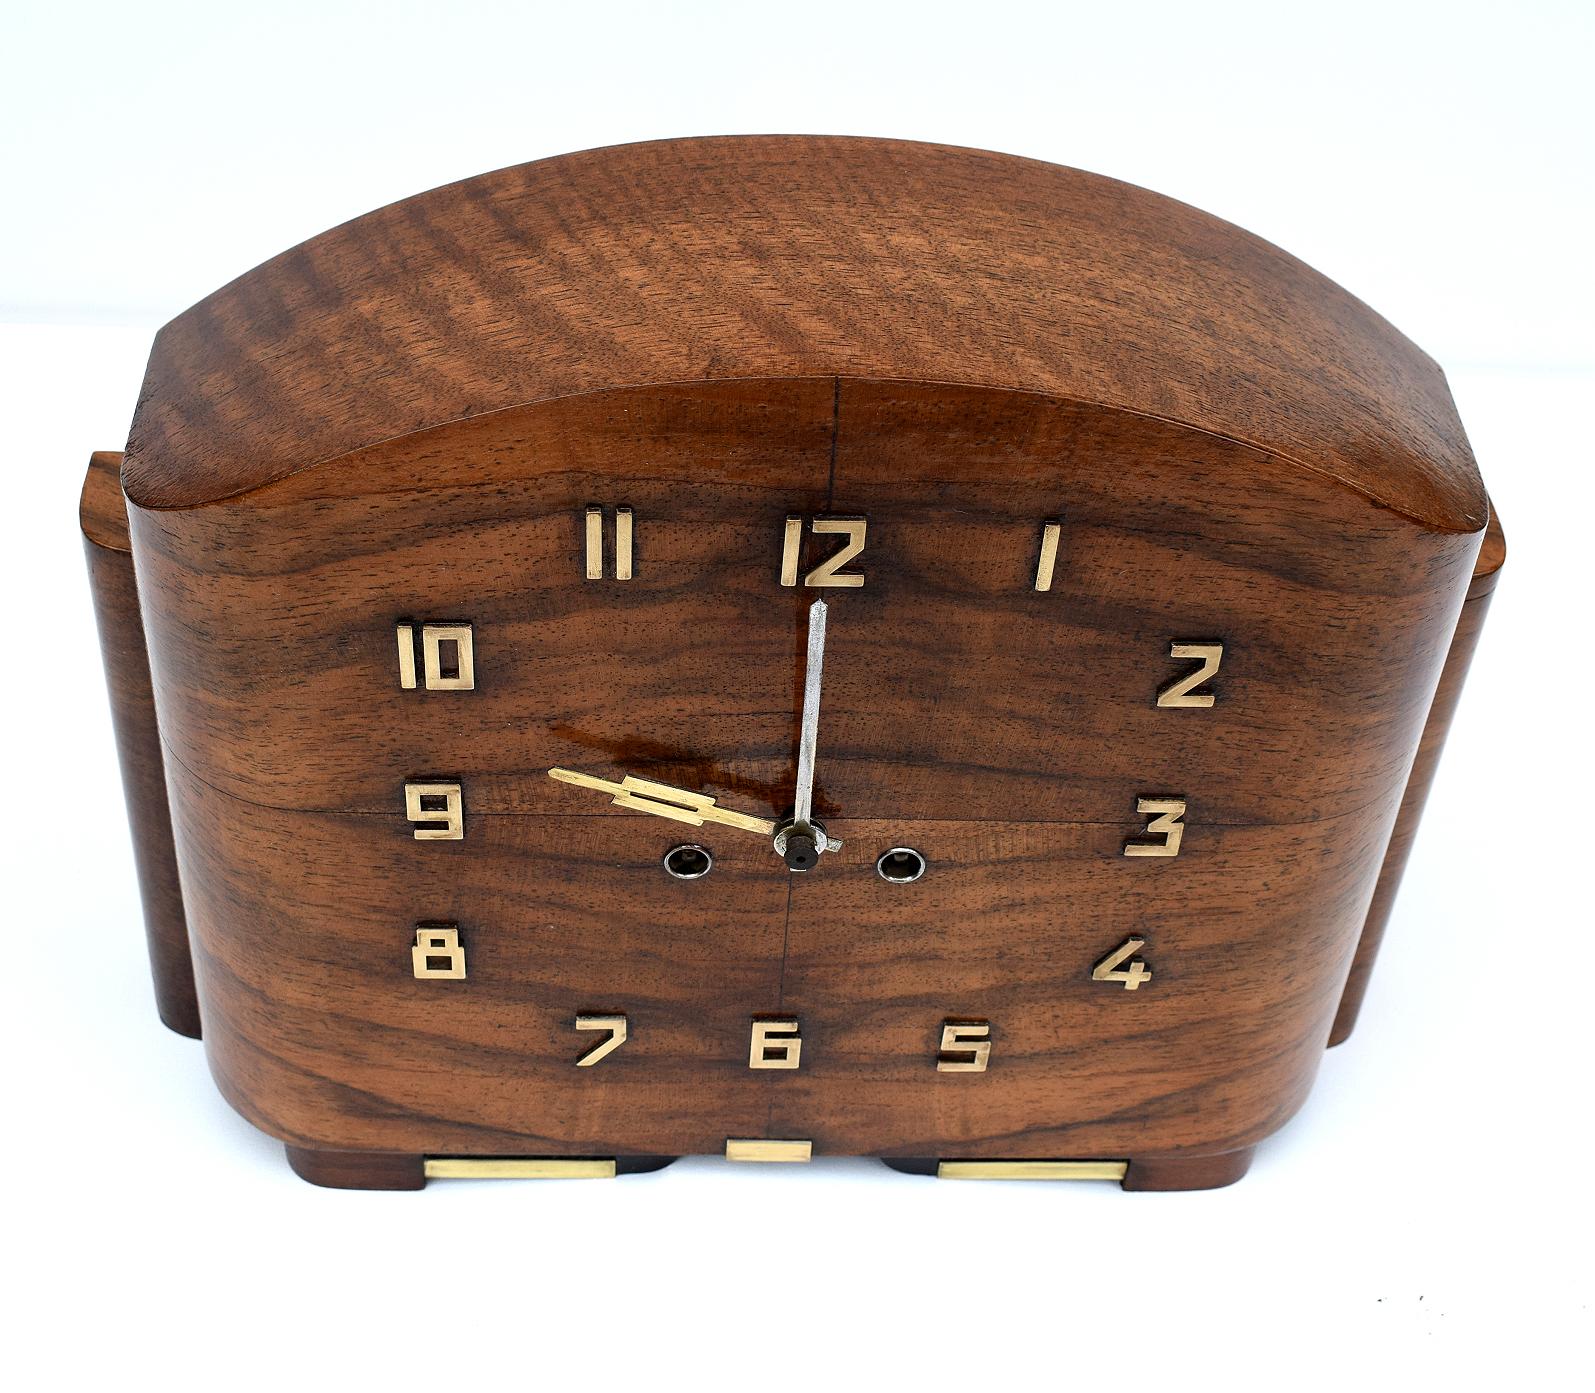 For your consideration is this English free standing 1930s Art Deco mantle clock. The case is made from Walnut and is embellished with brass Art Deco stylized numerals which are in relief. The movement is eight day and strikes on the hour. We've had